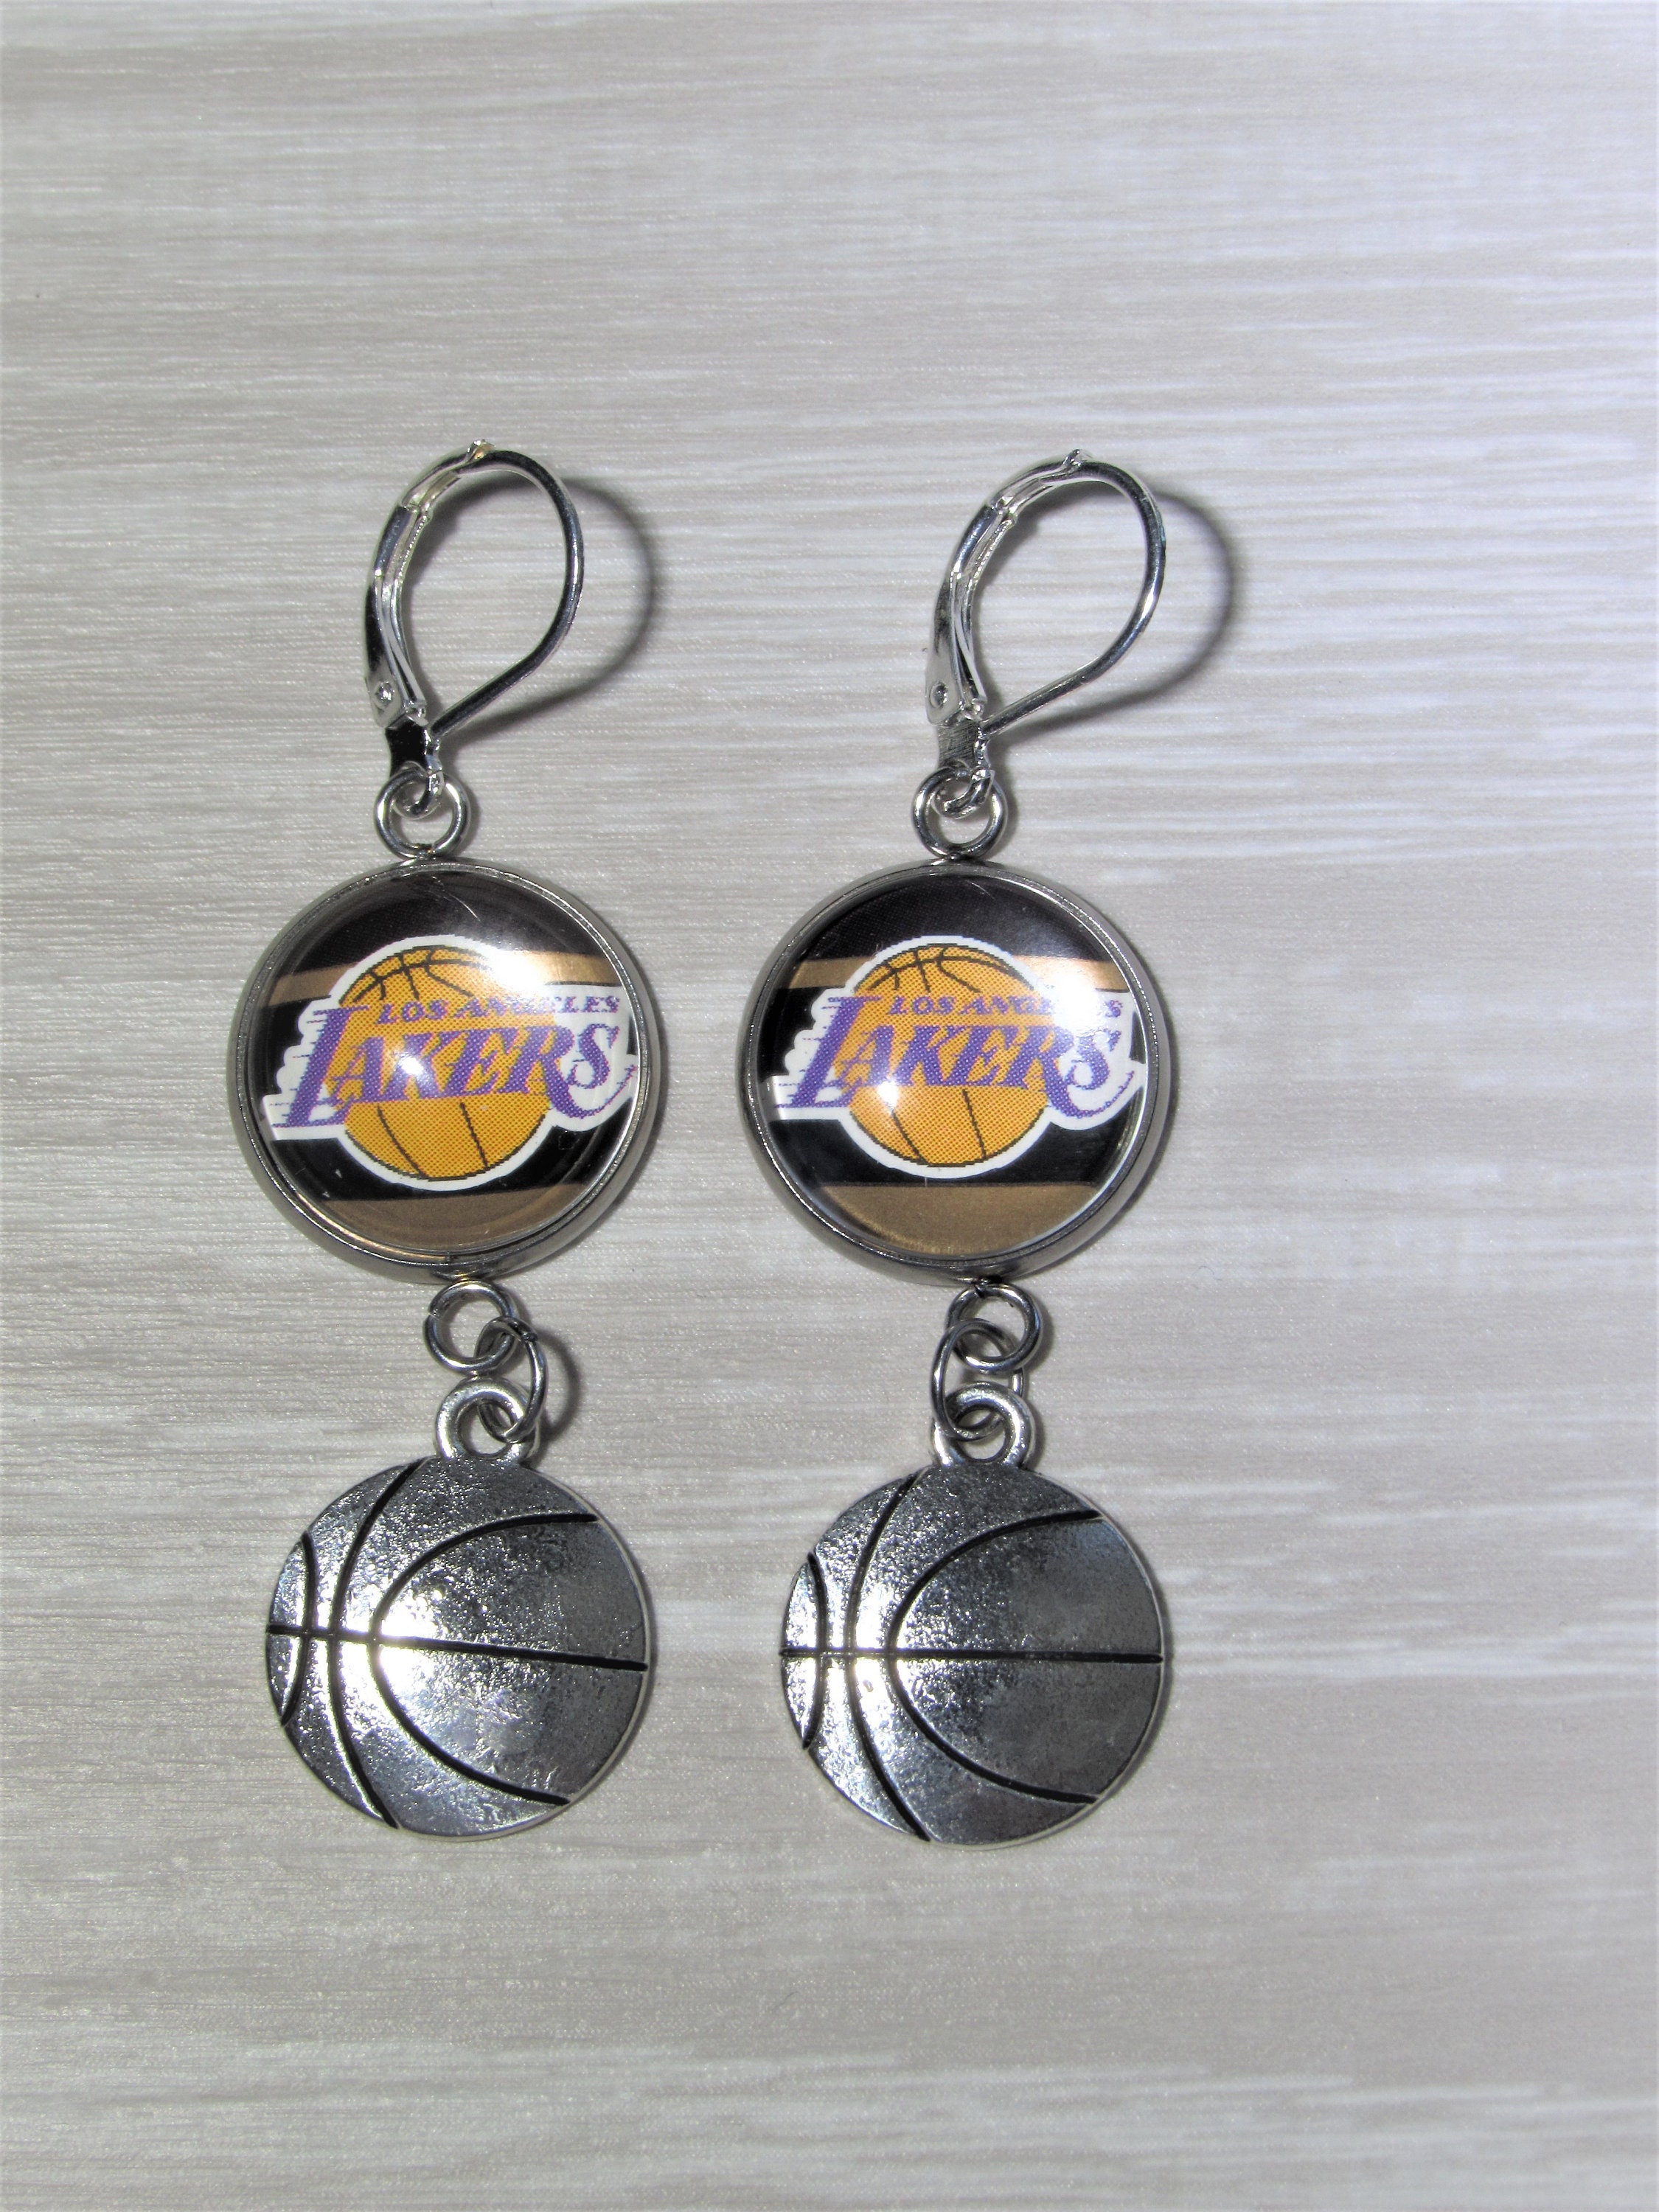 Los Angeles Lakers Earrings made from Recycled Basketball | Etsy